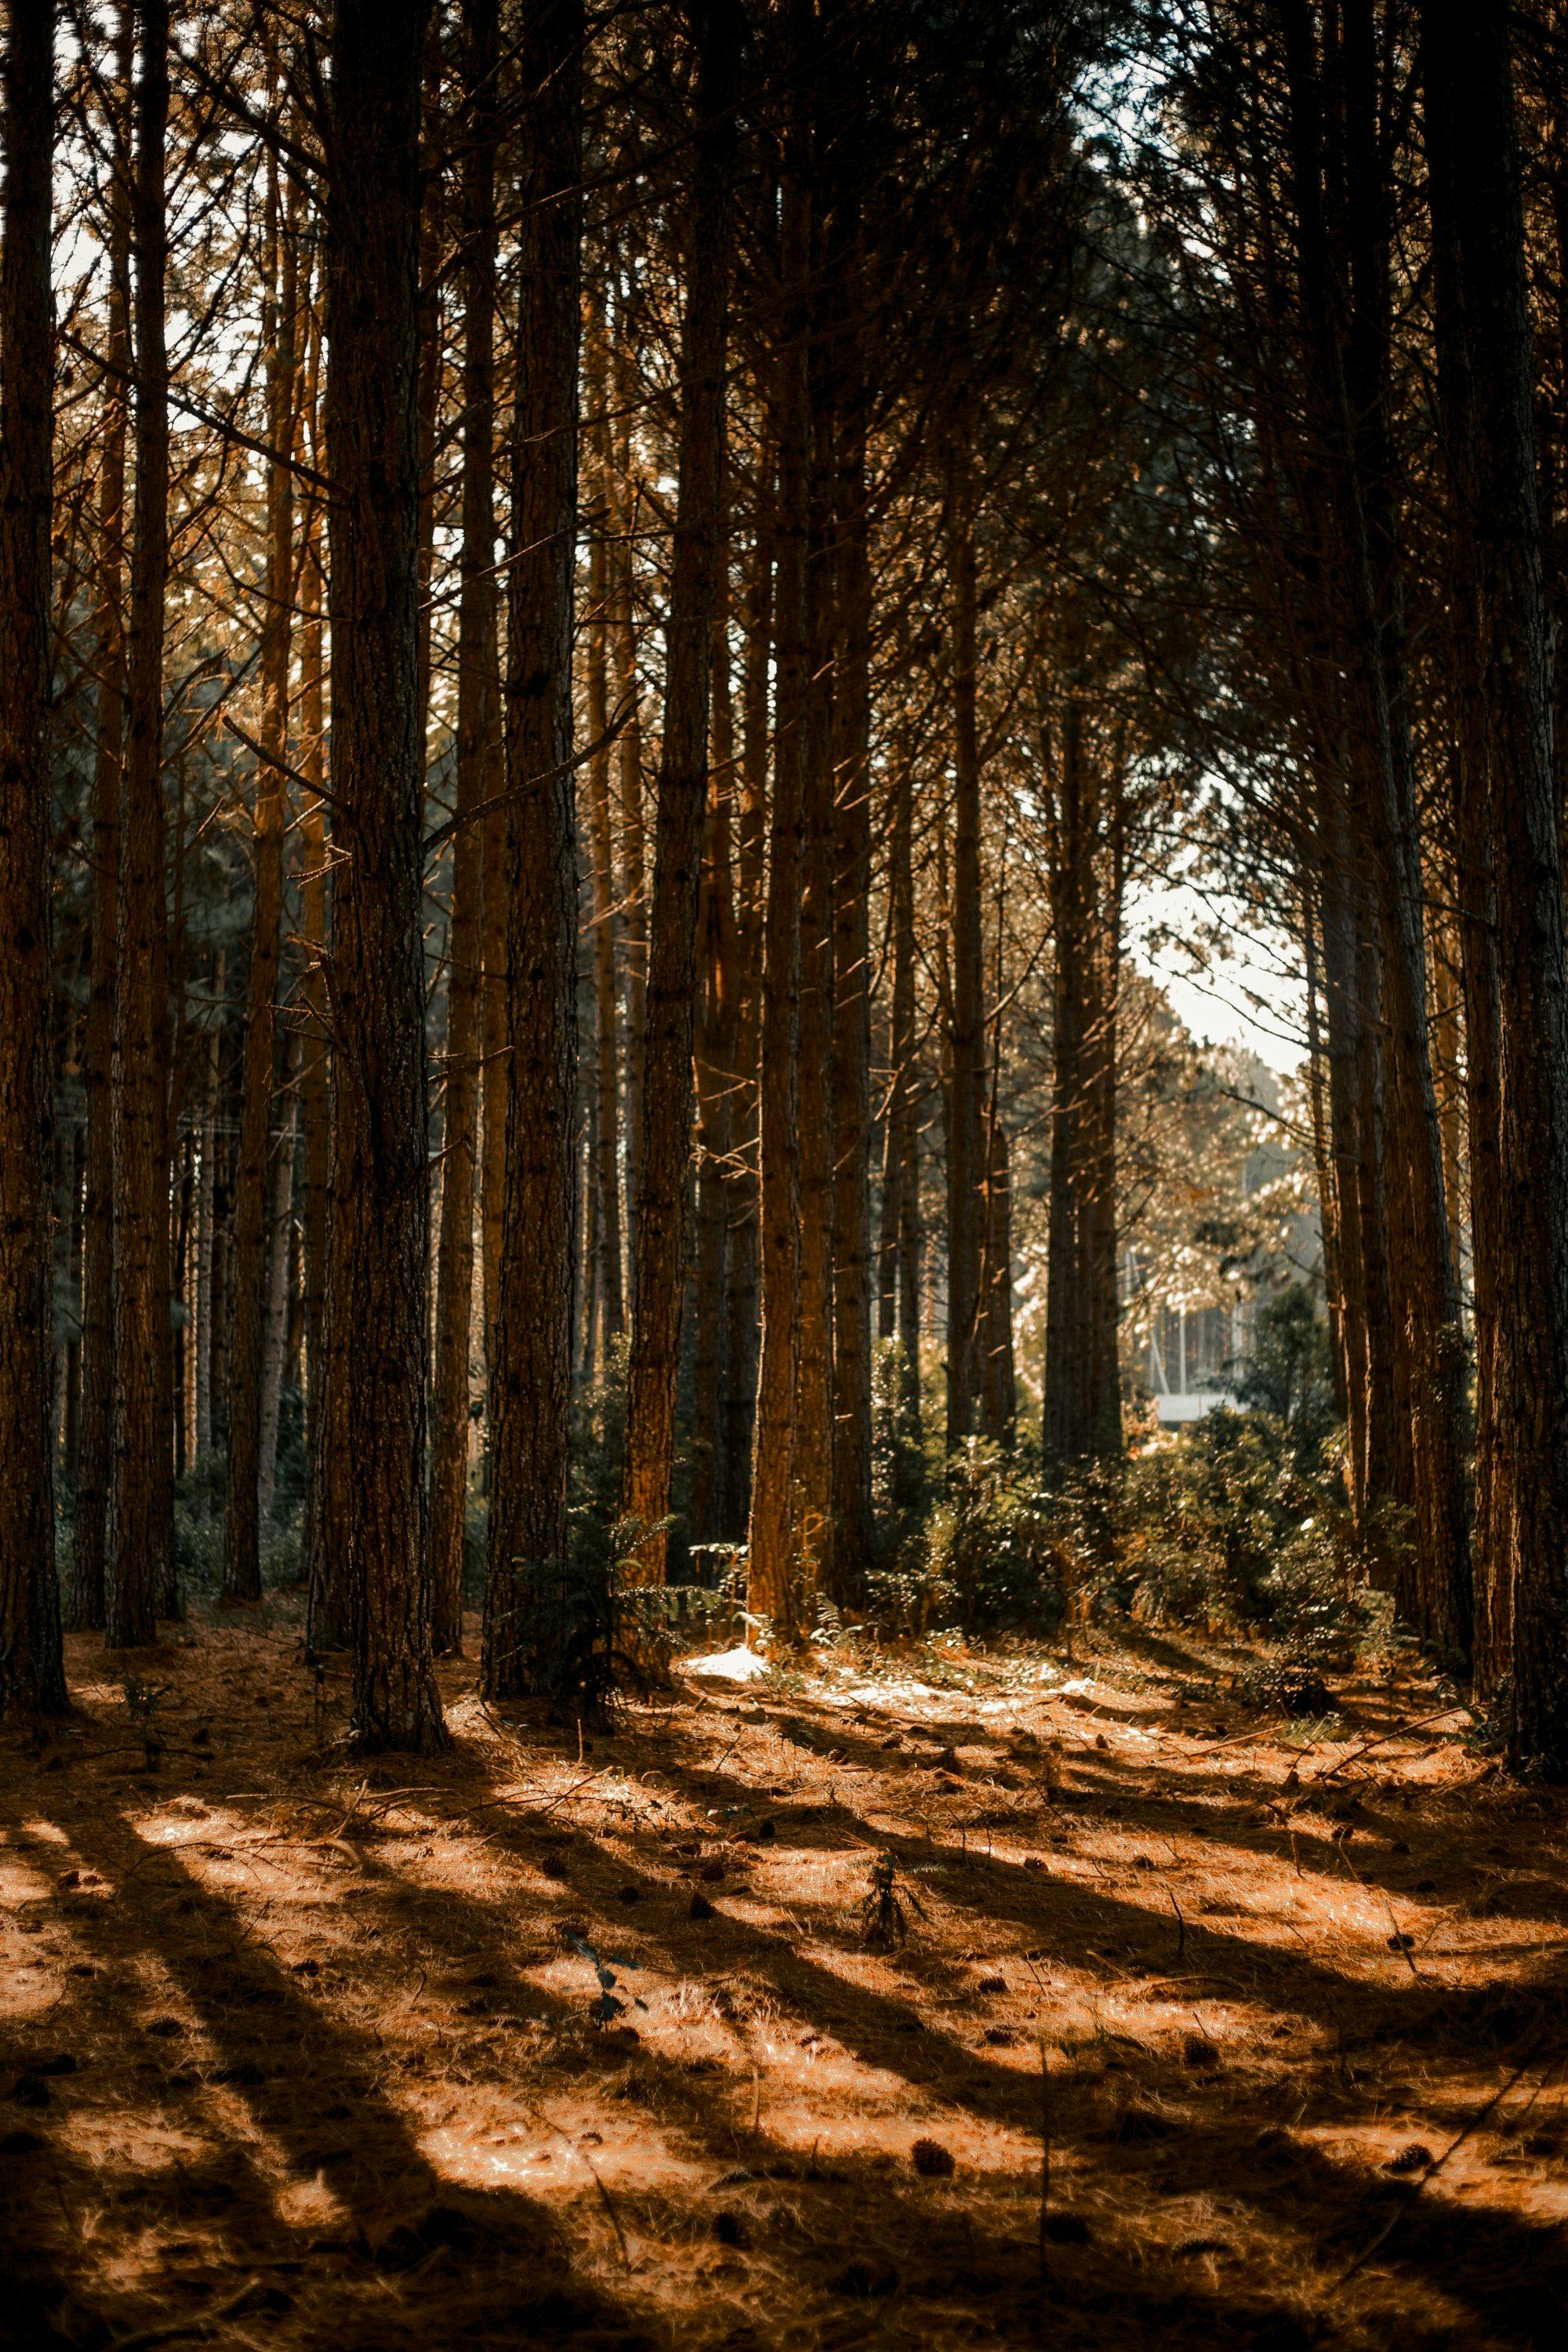 Warm sunlight beaming through pine trees into a glade.